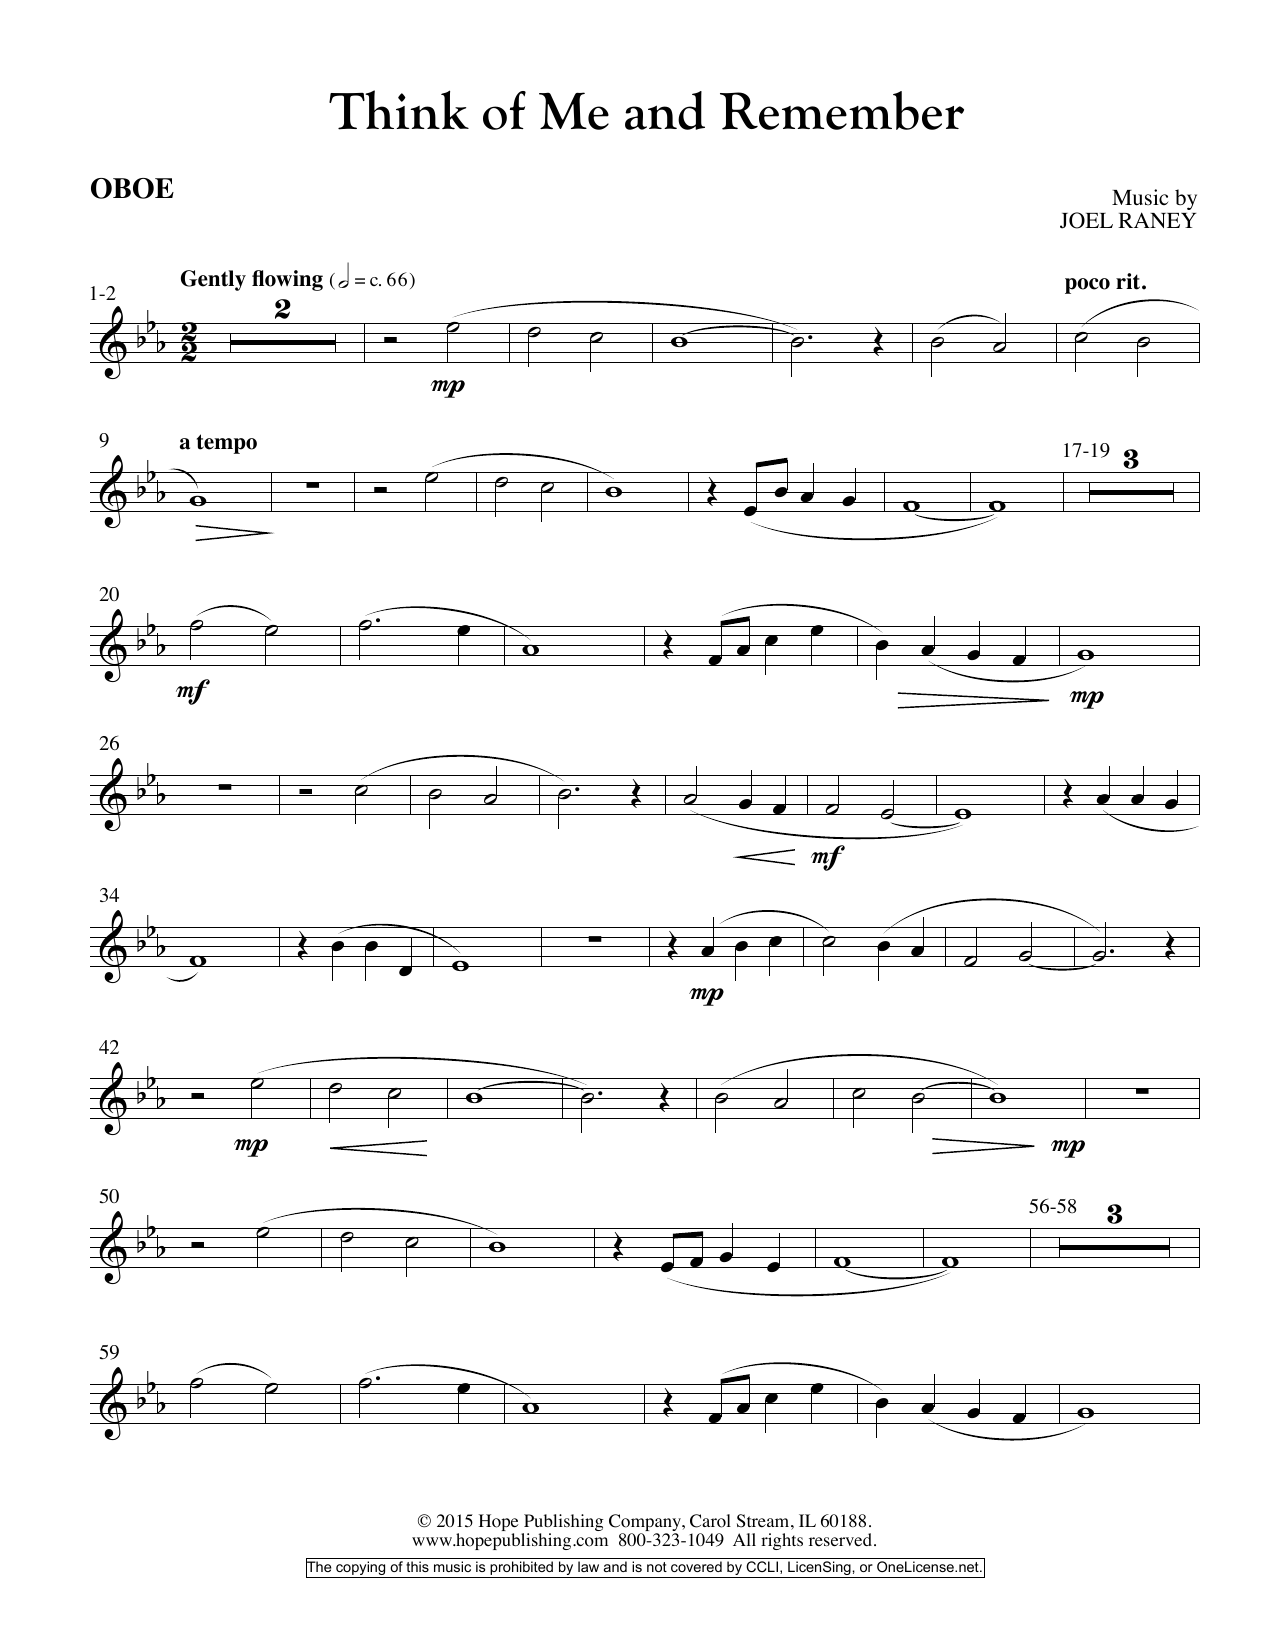 Download Joel Raney Think Of Me And Remember - Oboe Sheet Music